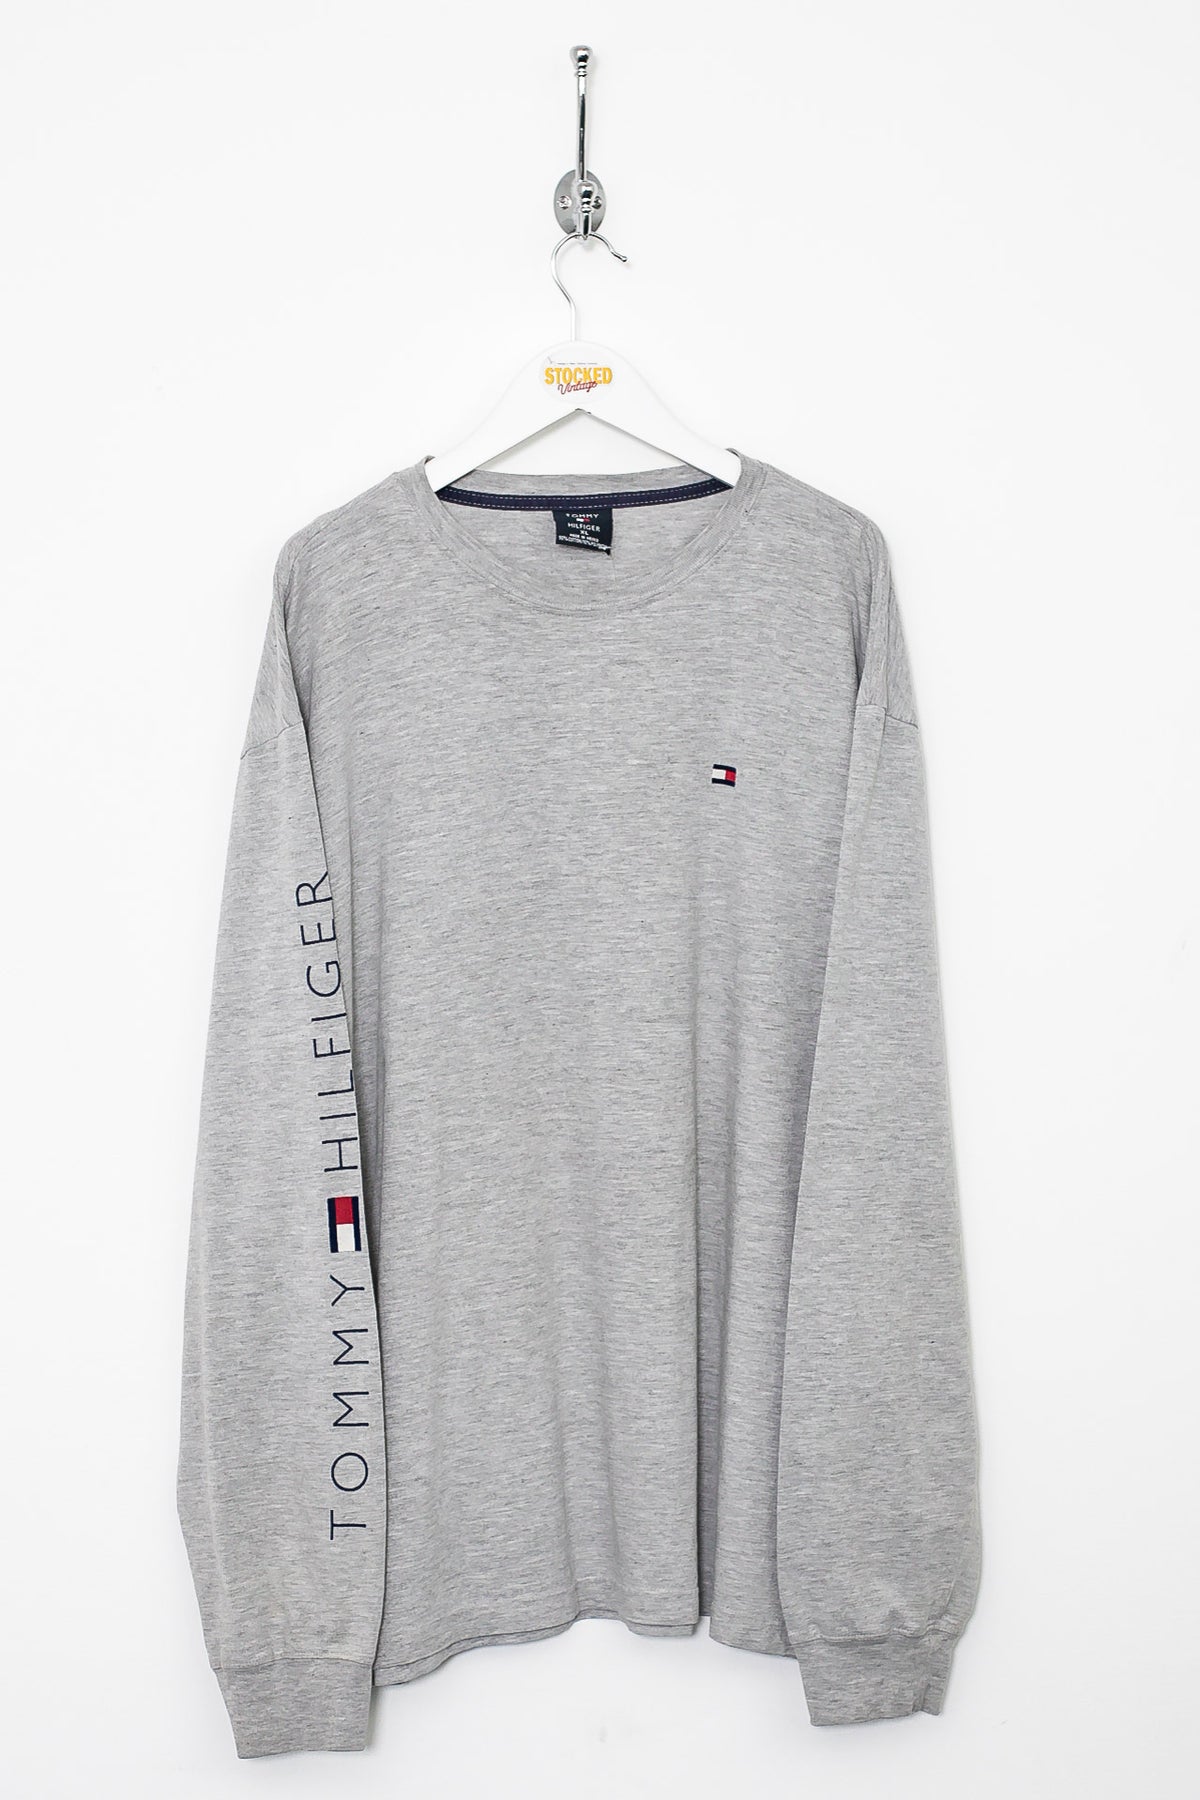 00s Tommy Hilfiger Long Sleeve Tee (XL)